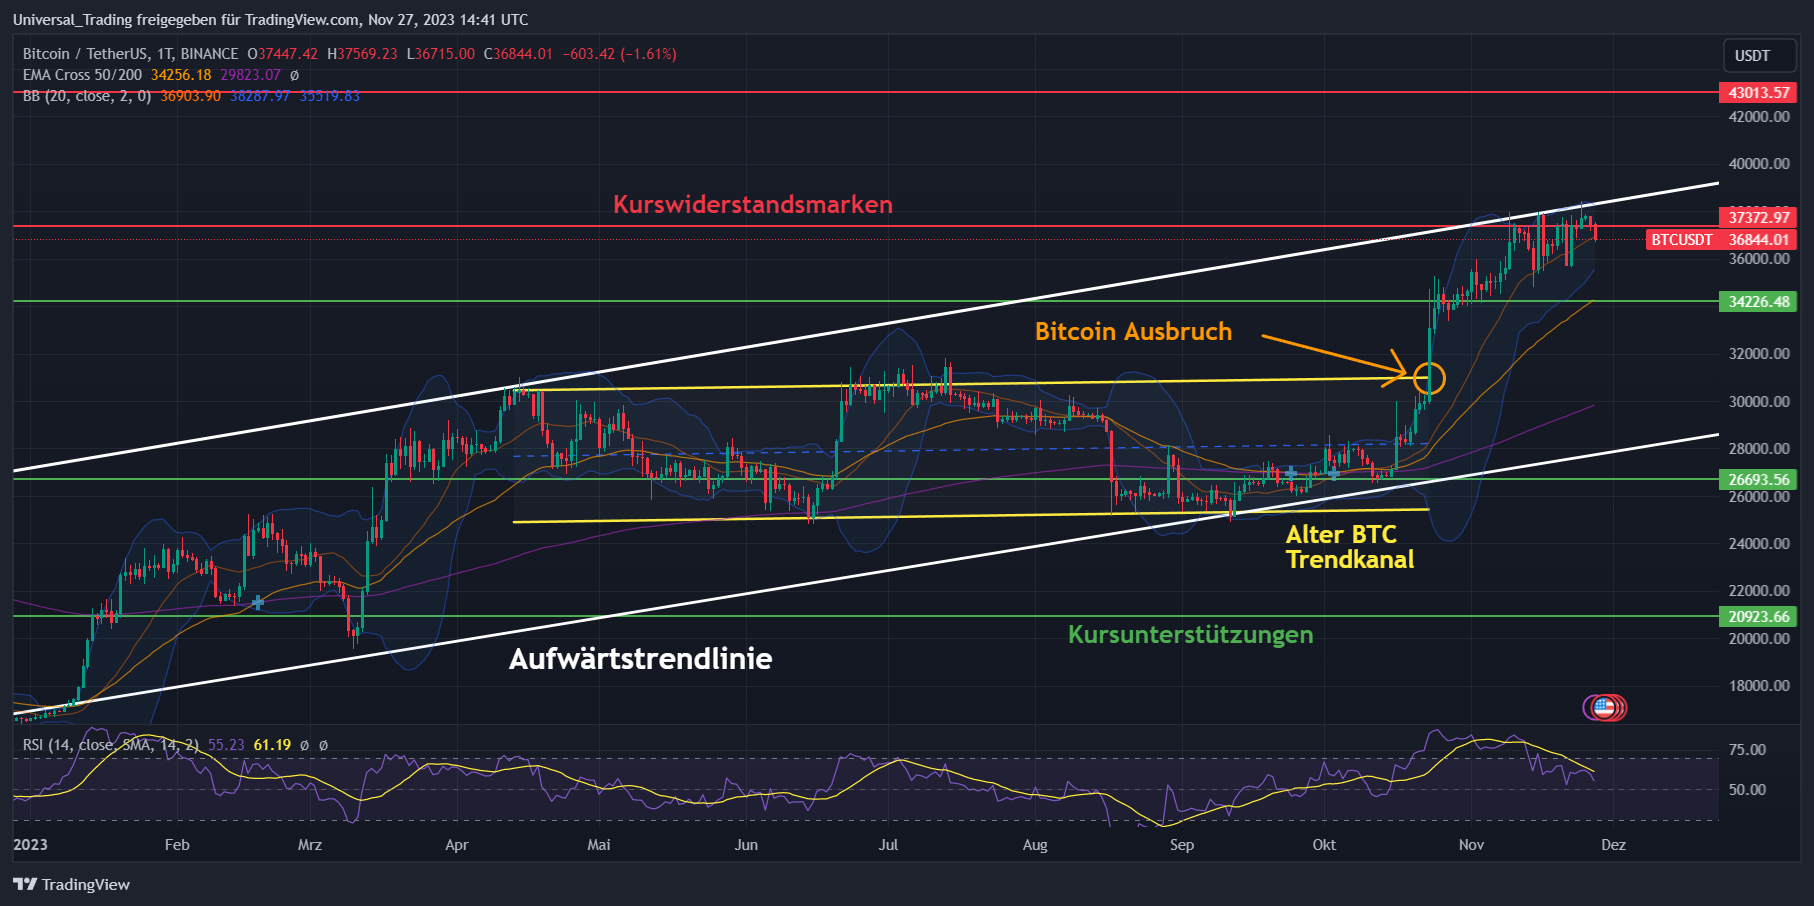 BTC-Kurs Chartanalyse in Tagesdarstellung (Stand: 27.11.23)